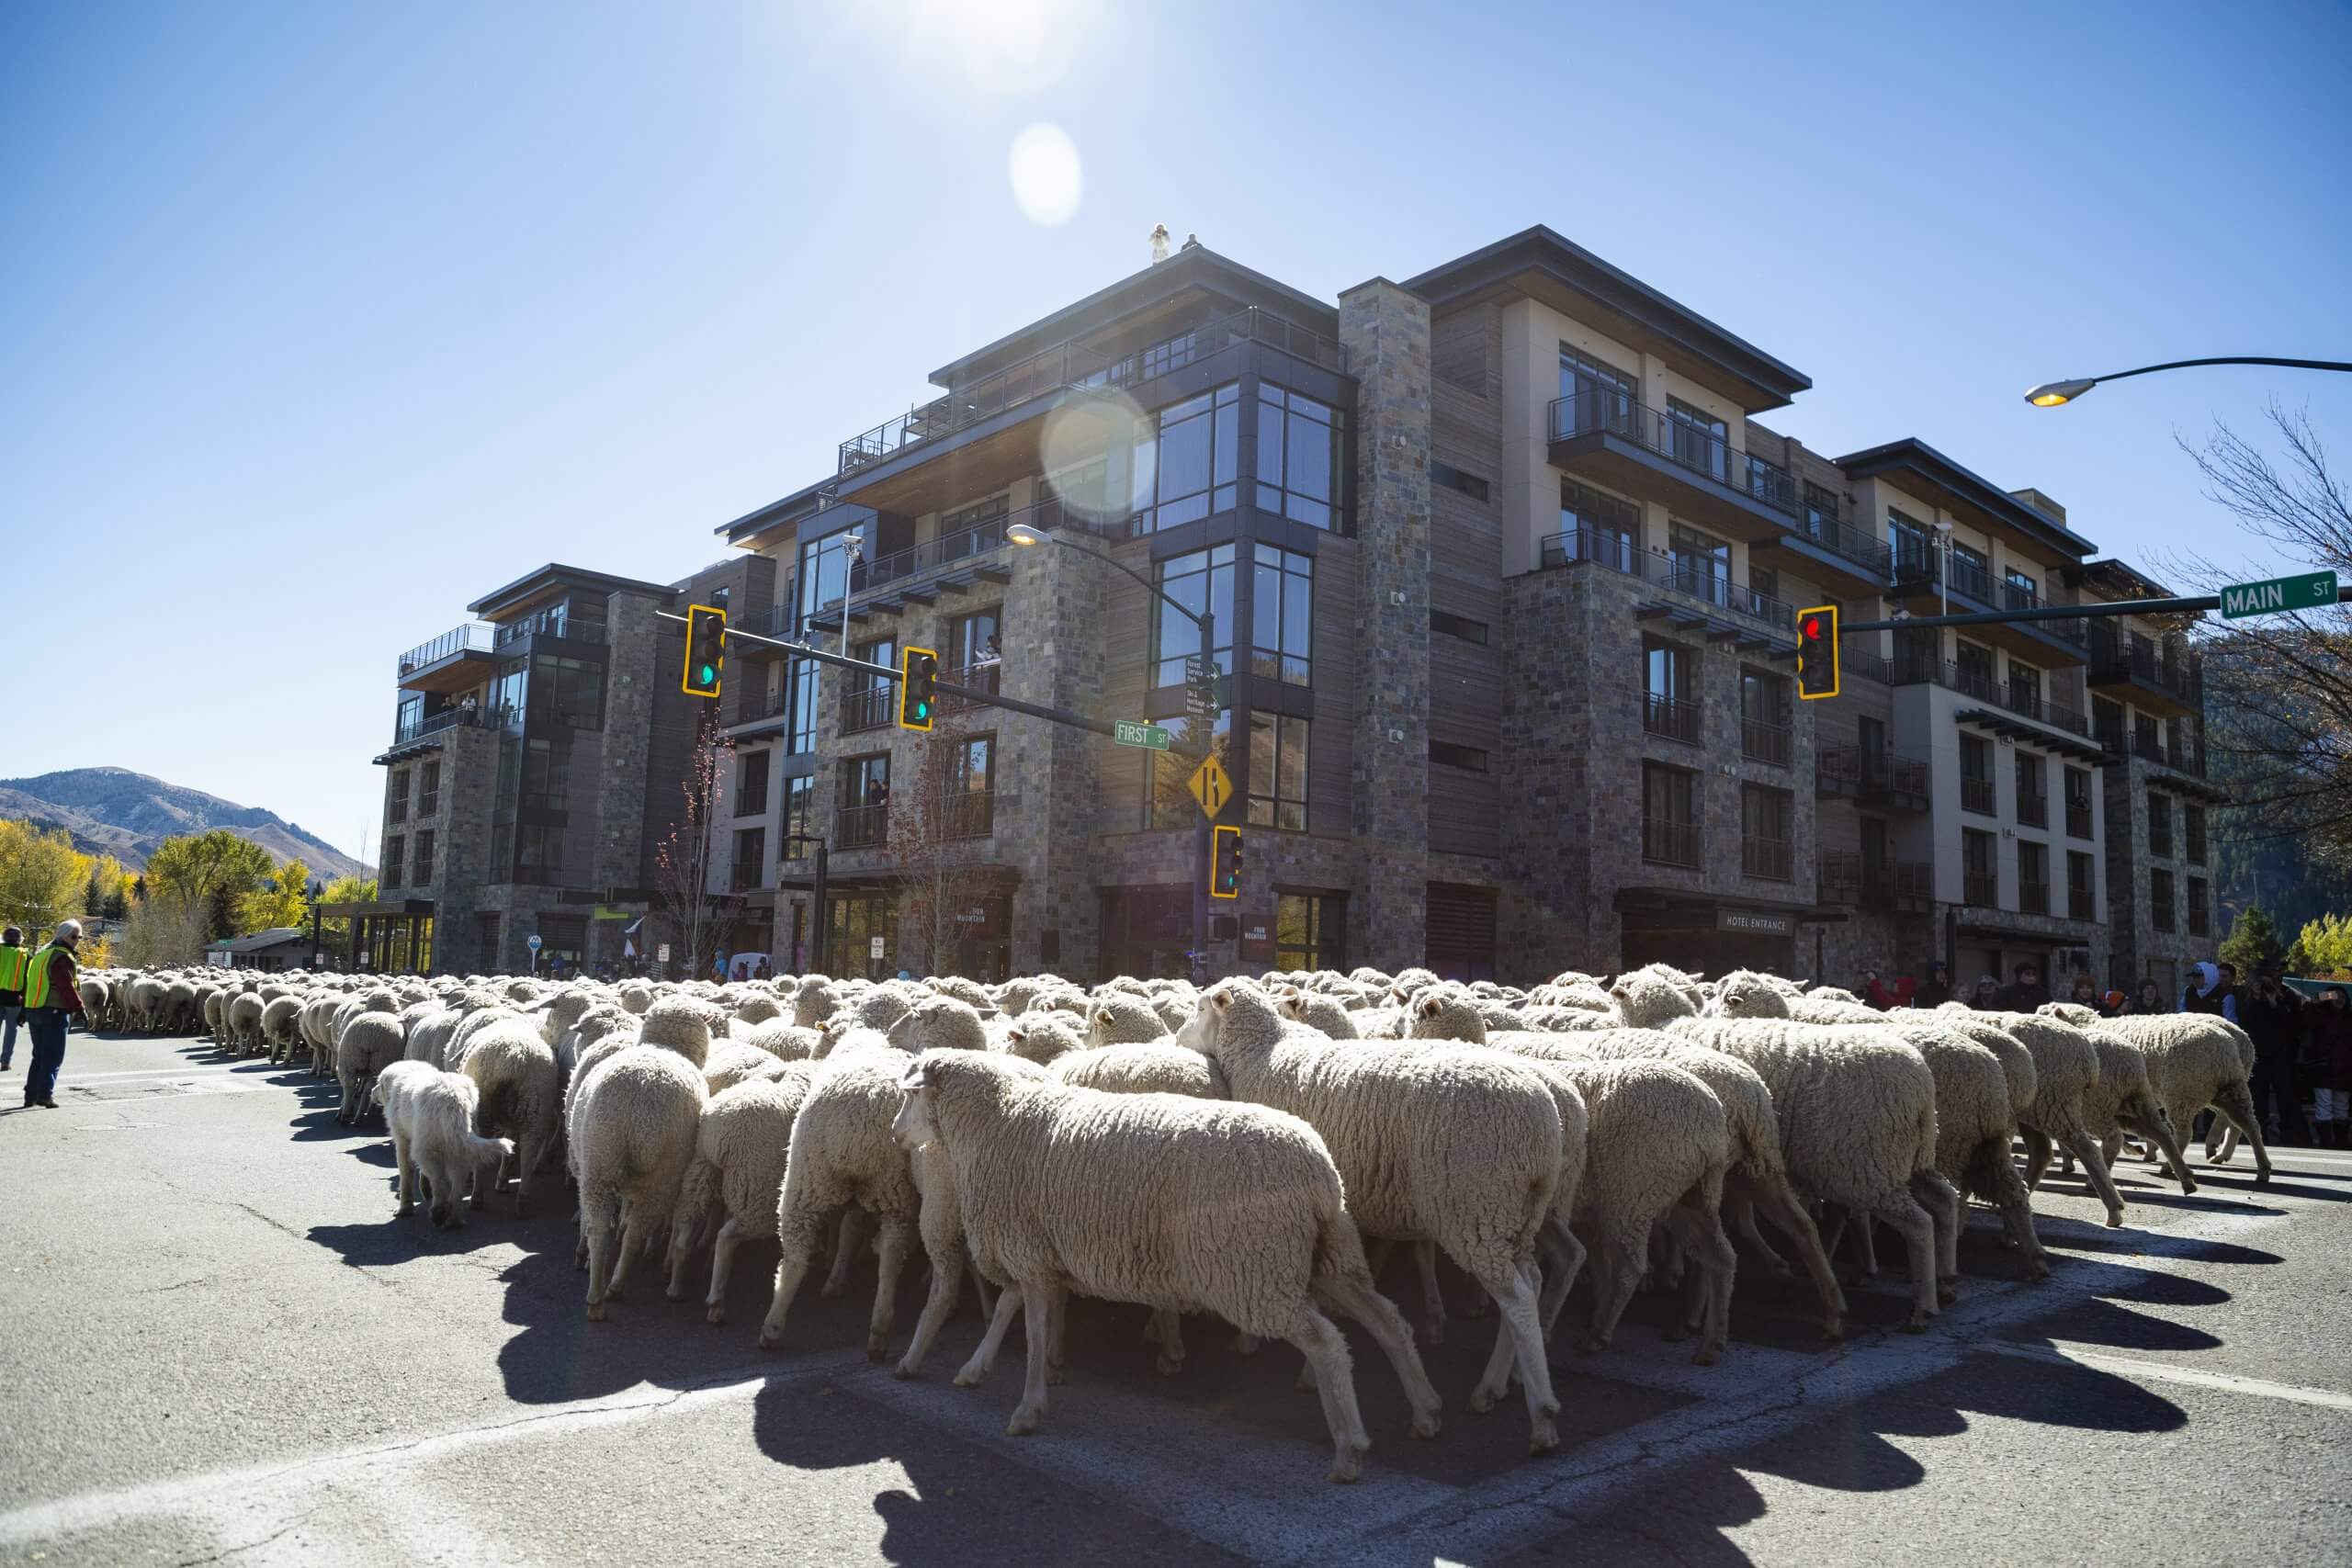 A large herd of sheep moving down a street at the Trailing of the Sheep Festival in Ketchum.